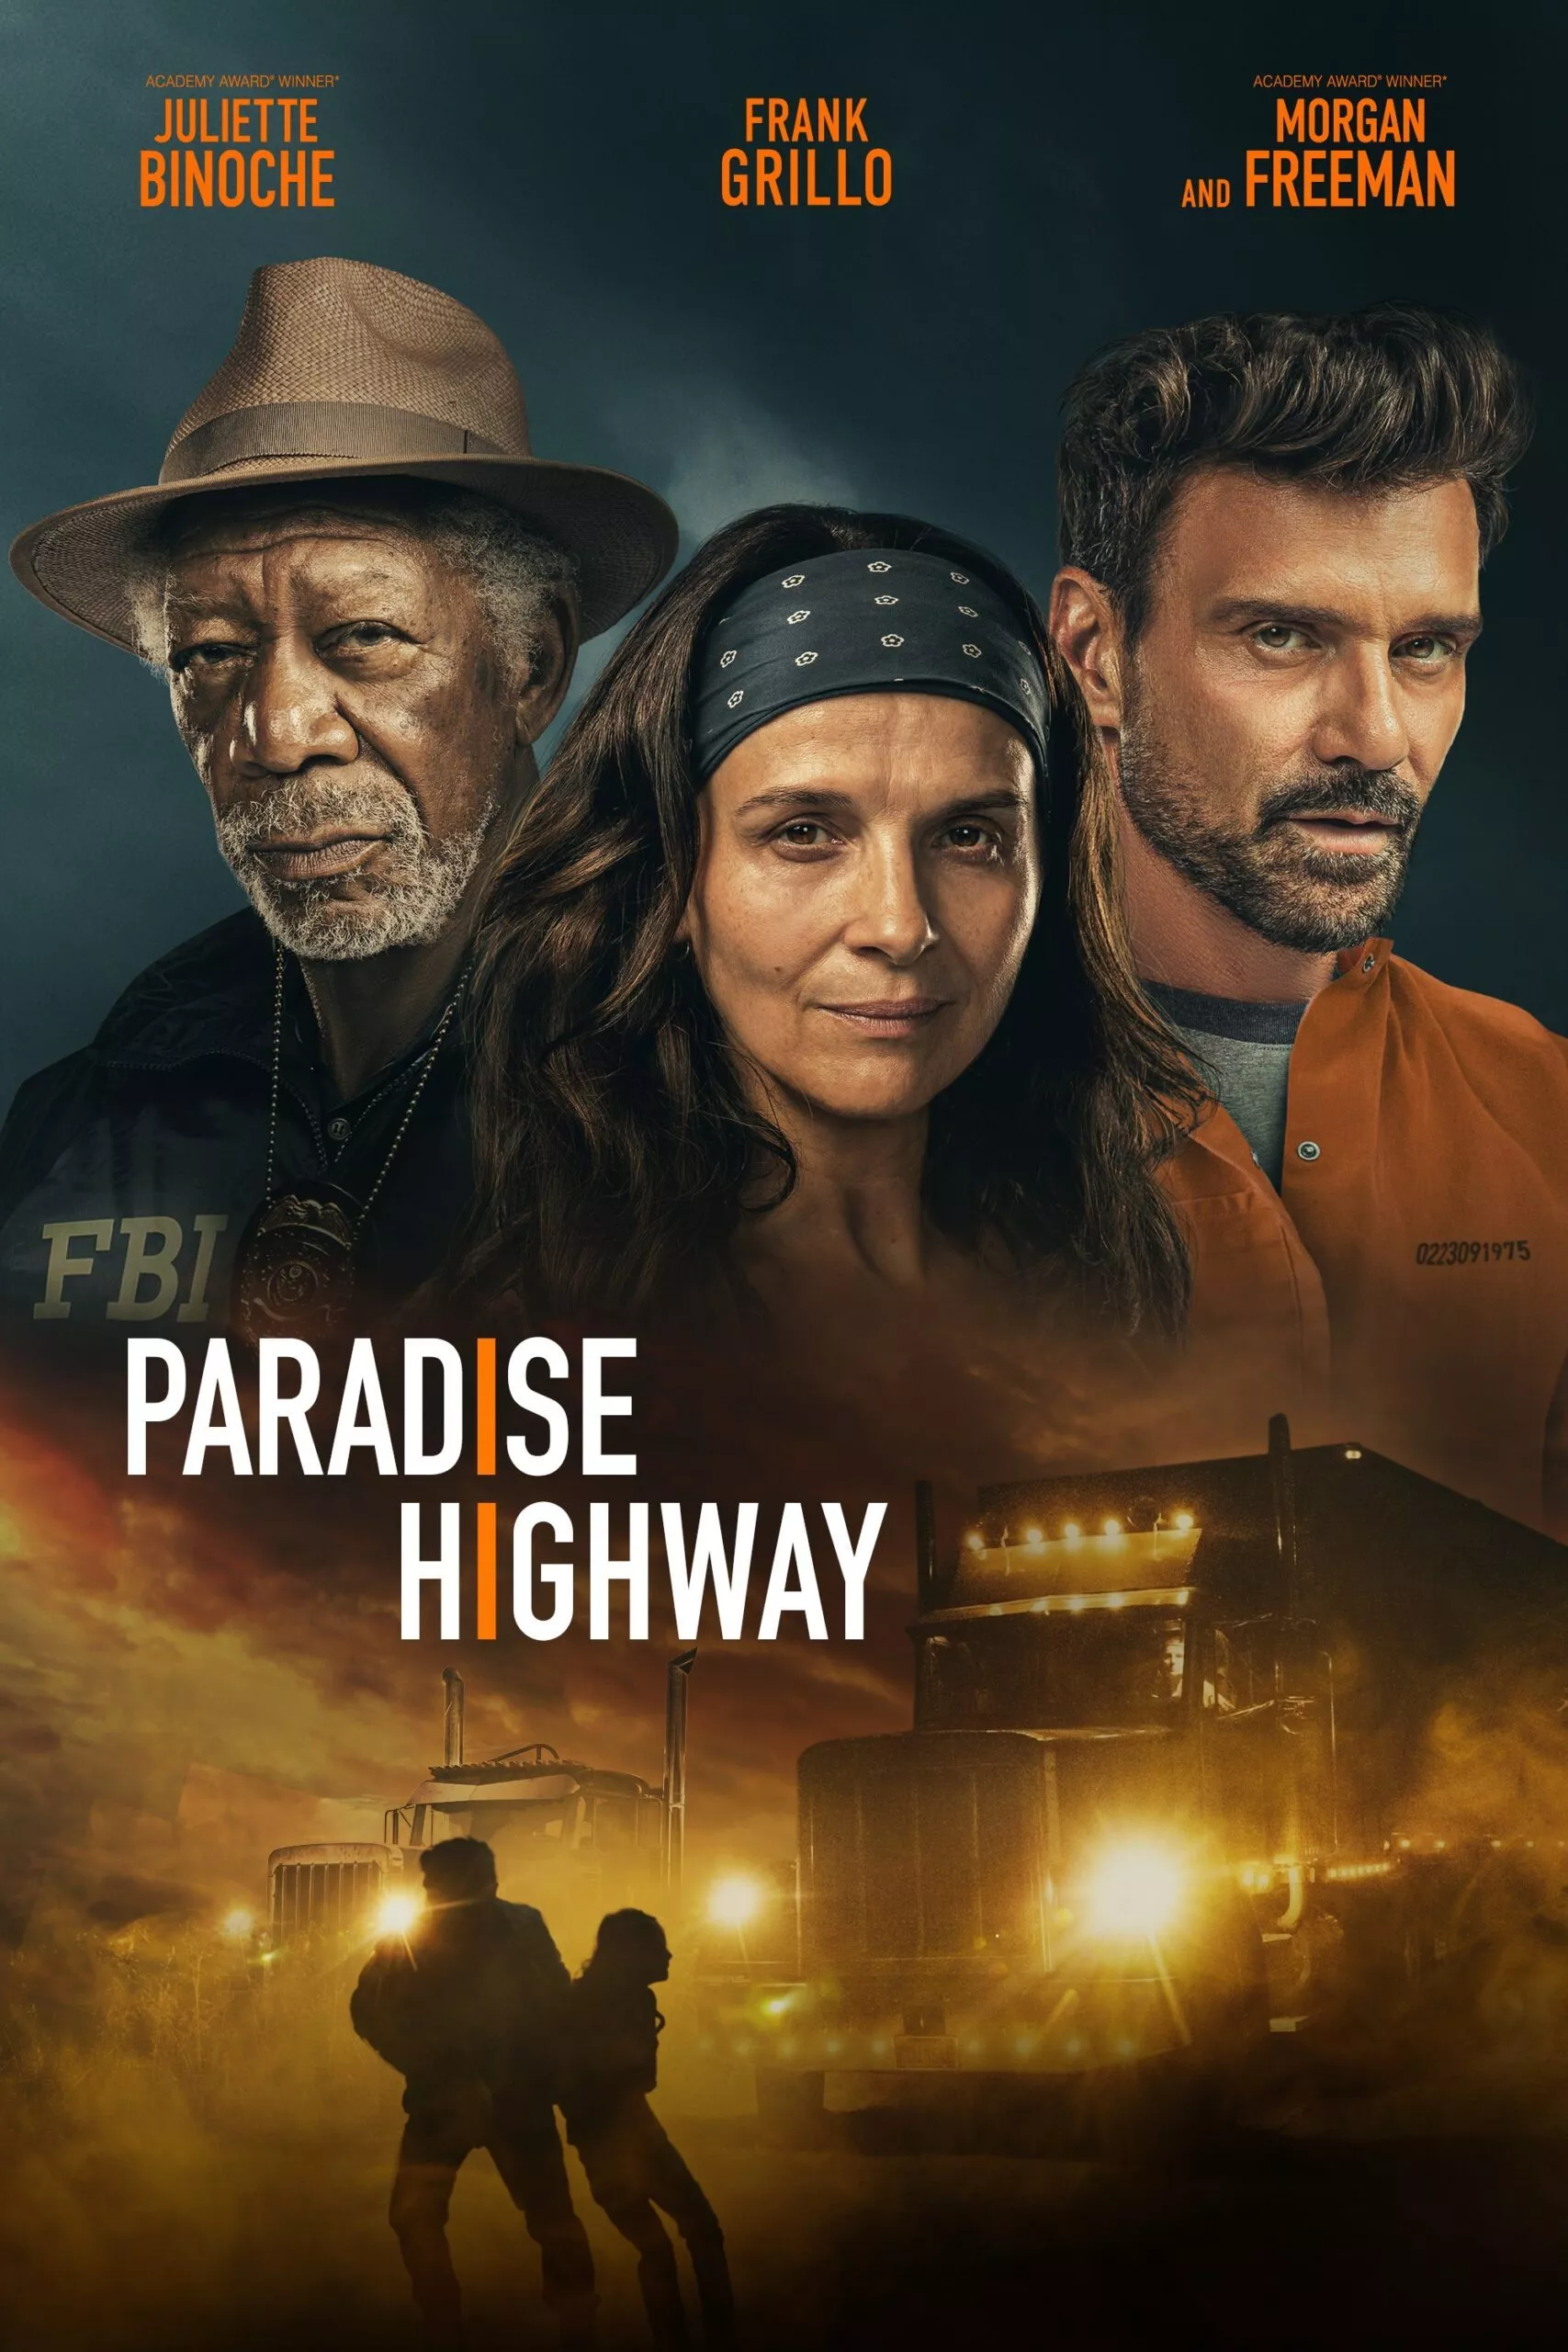 PARADISE HIGHWAY | Official Trailer